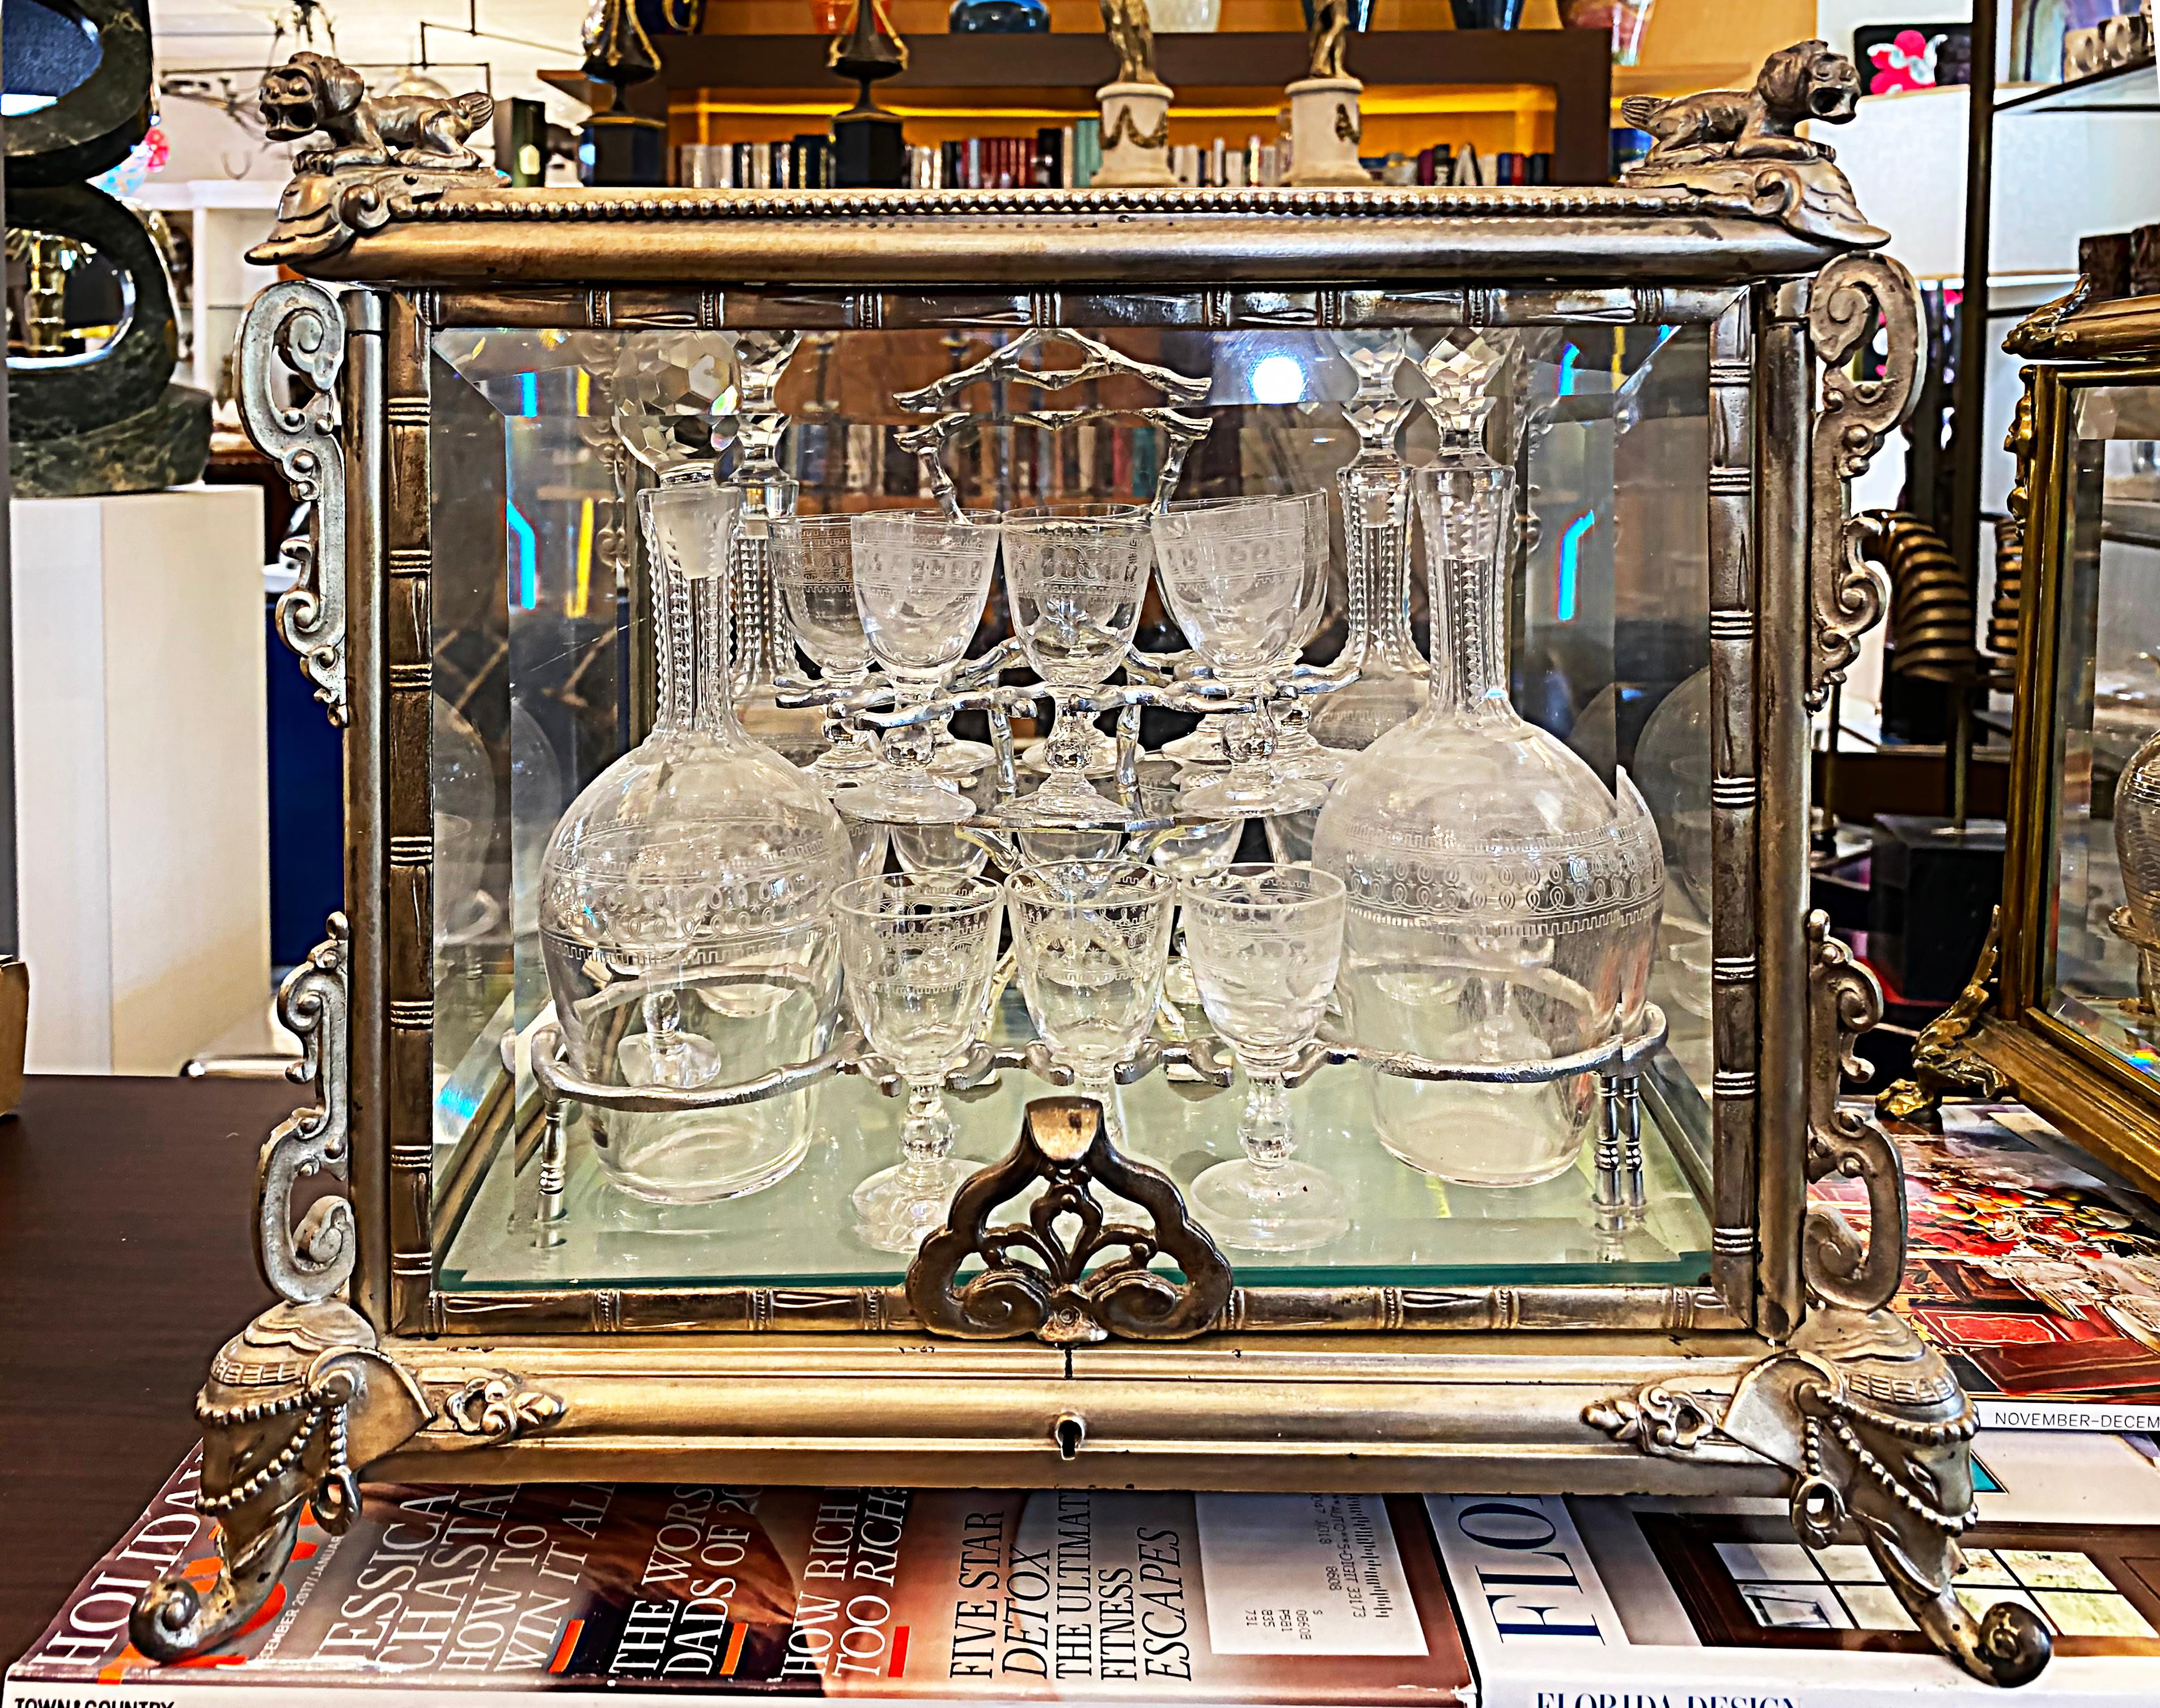 French Silvered Bronze cut crystal tantalus set, decanters and glassware 

Offered for sale is a 19th-century French bronze tantalus set with cut crystal decanters and glassware. The set is in very good vintage condition however, the case does